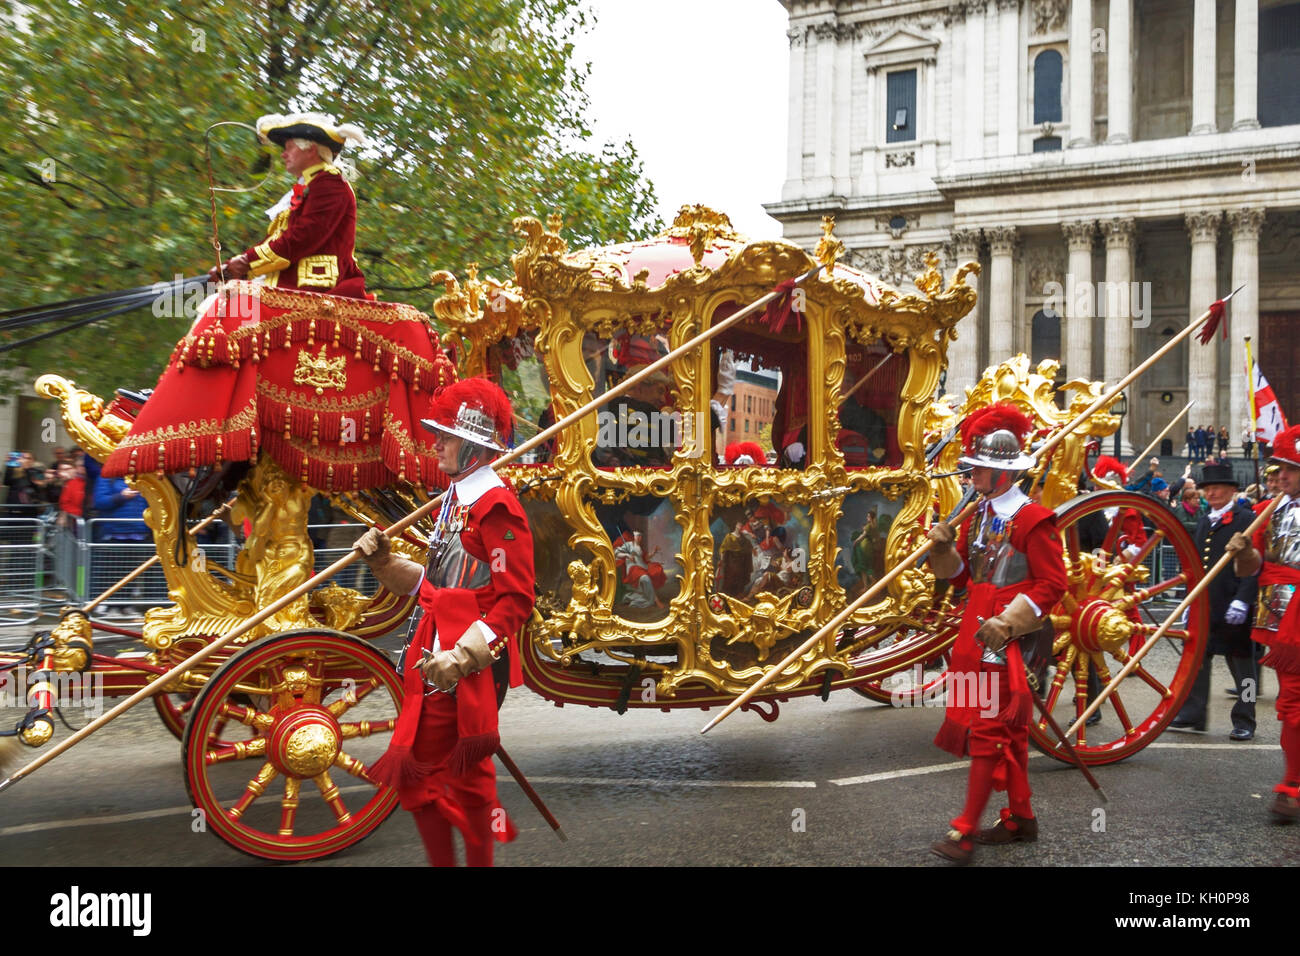 City of London, UK. 11th Nov, 2017. Lord Mayor's Show, London, UK. The Lord Mayor's golden State Carriage. Credit: Tony Farrugia/Alamy Live News Stock Photo